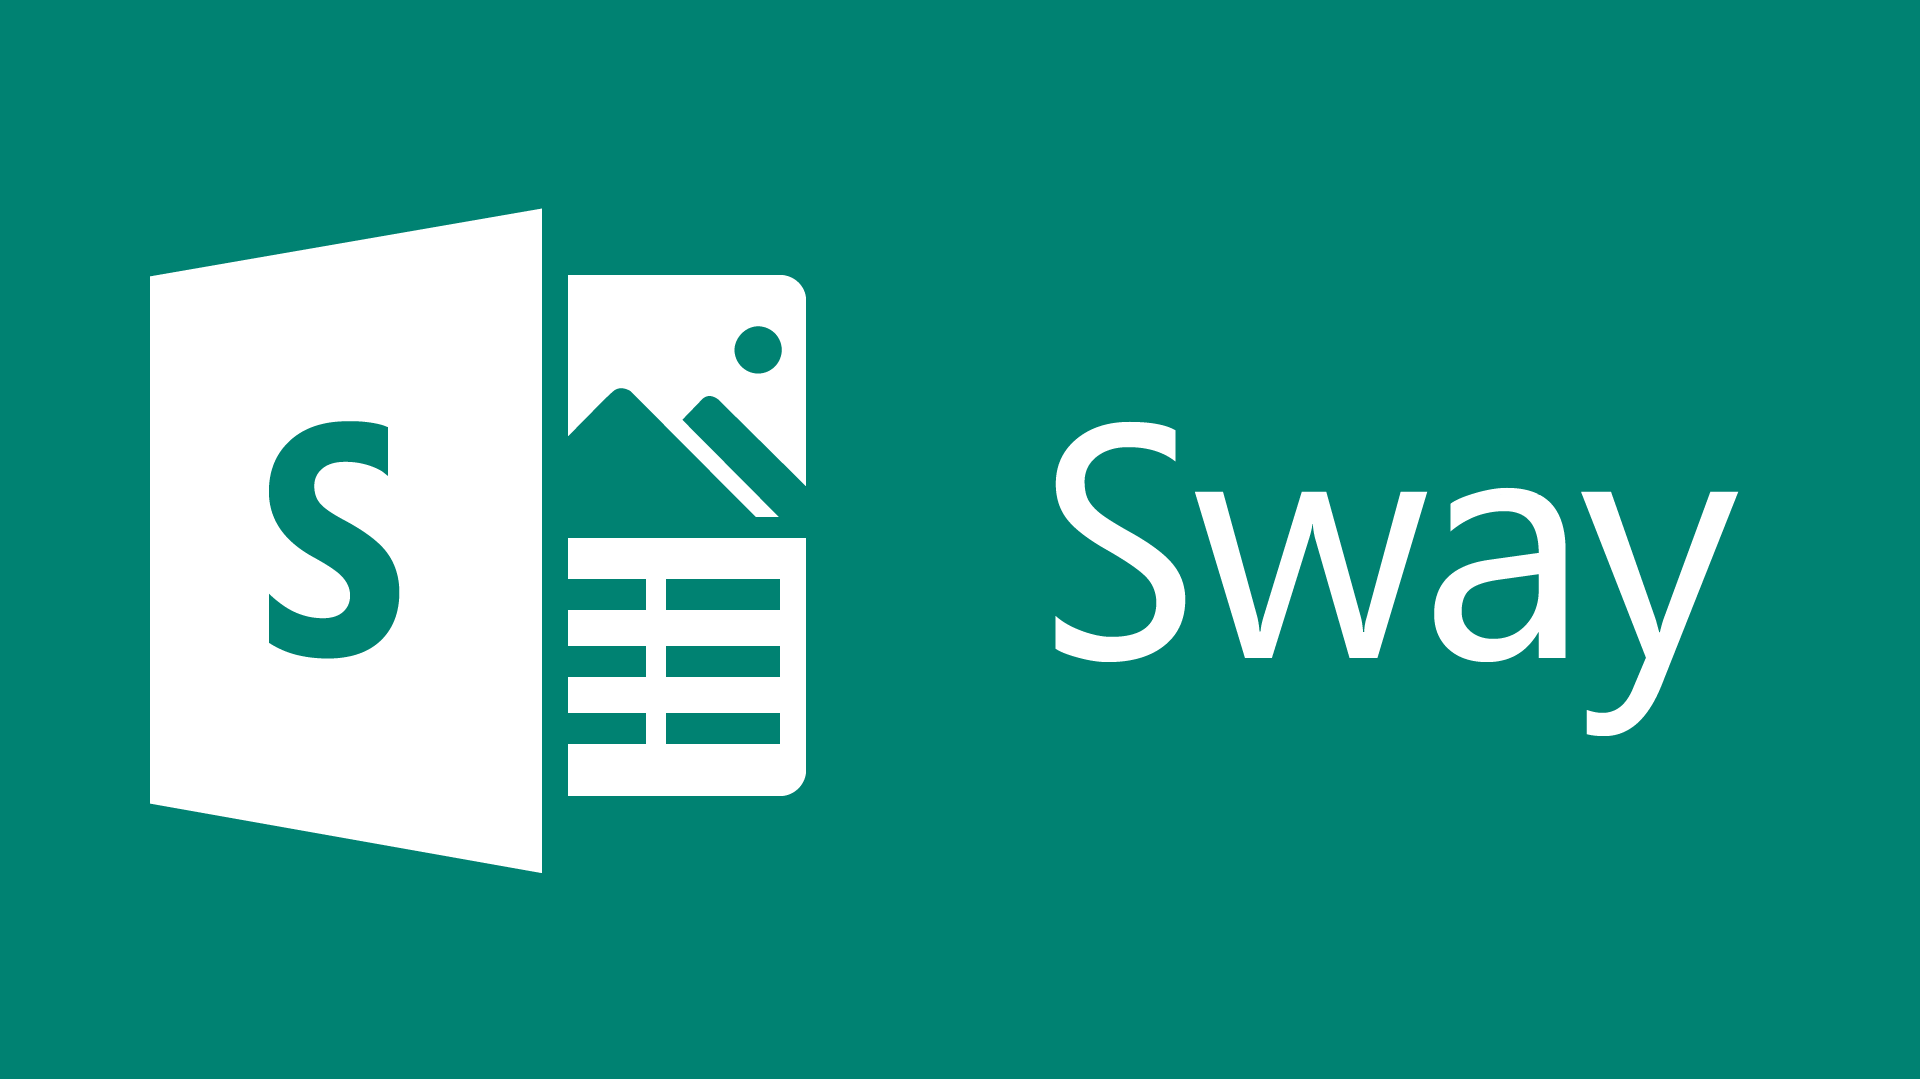 Sway for Windows 10 snags a new feature with the latest update